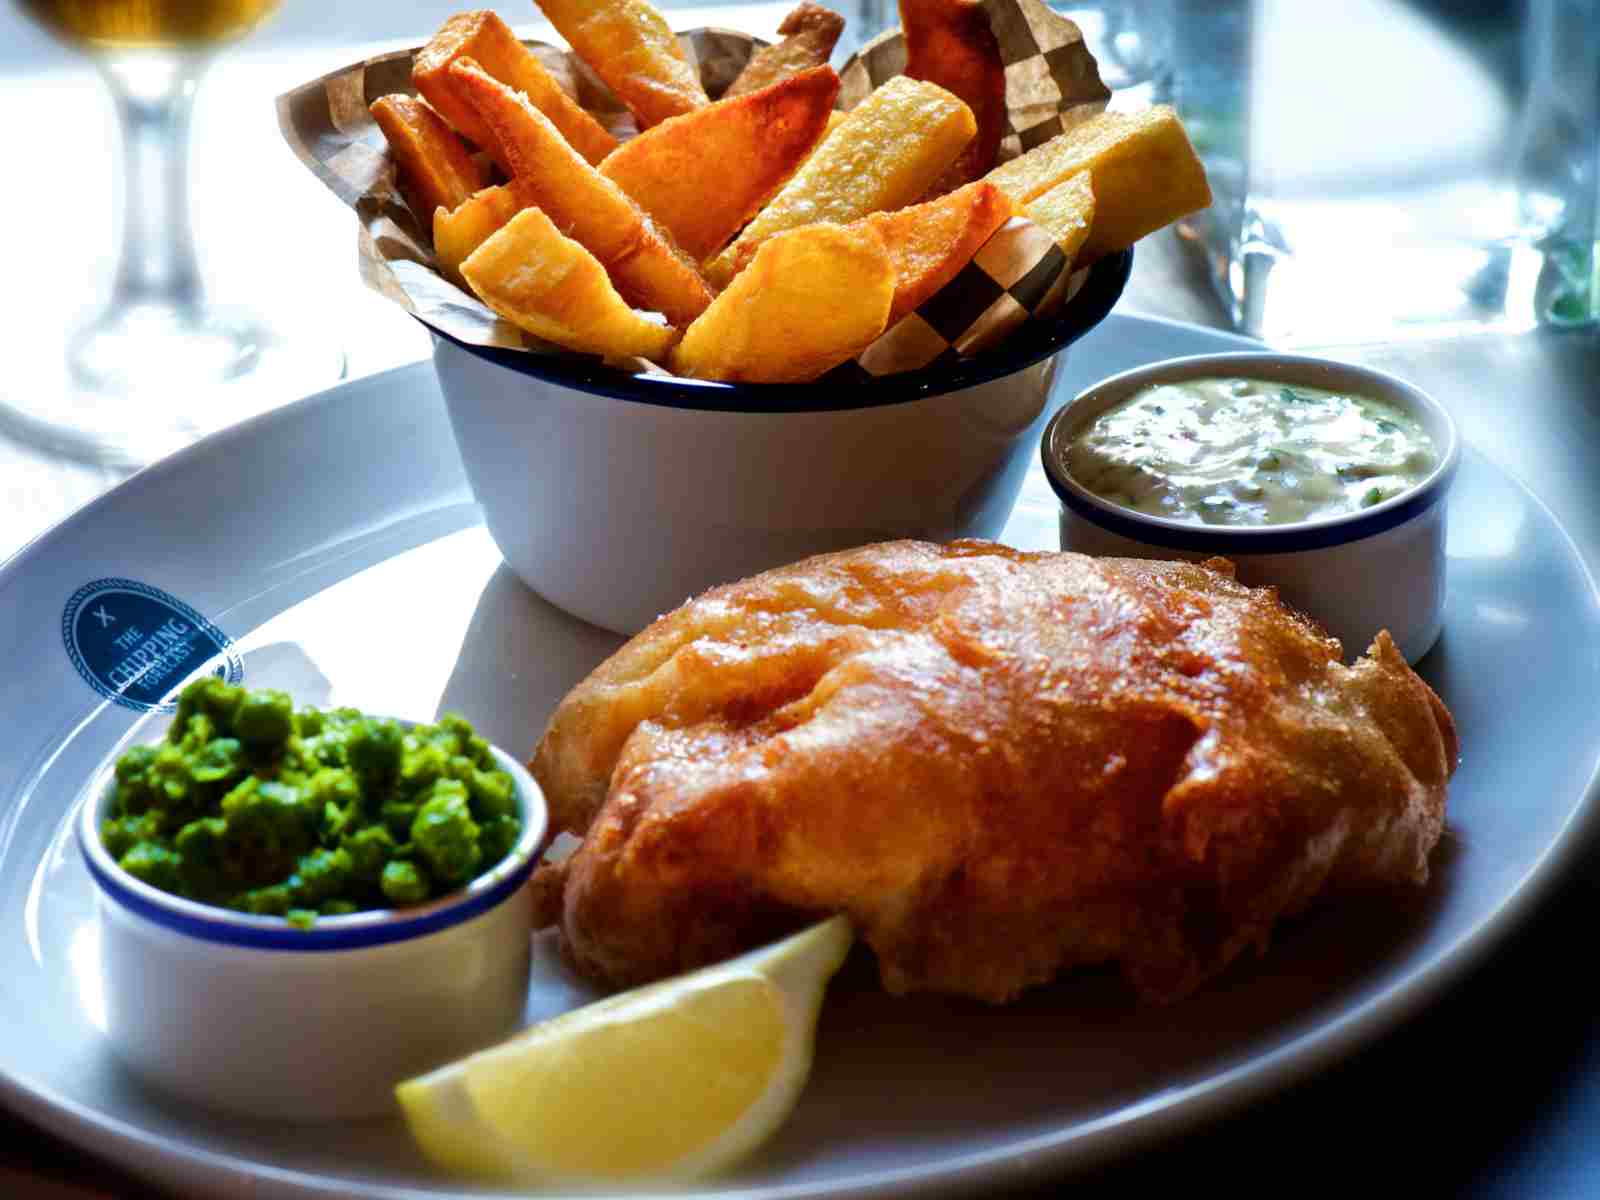 Best Fish and Chips in London - Footprints Tours